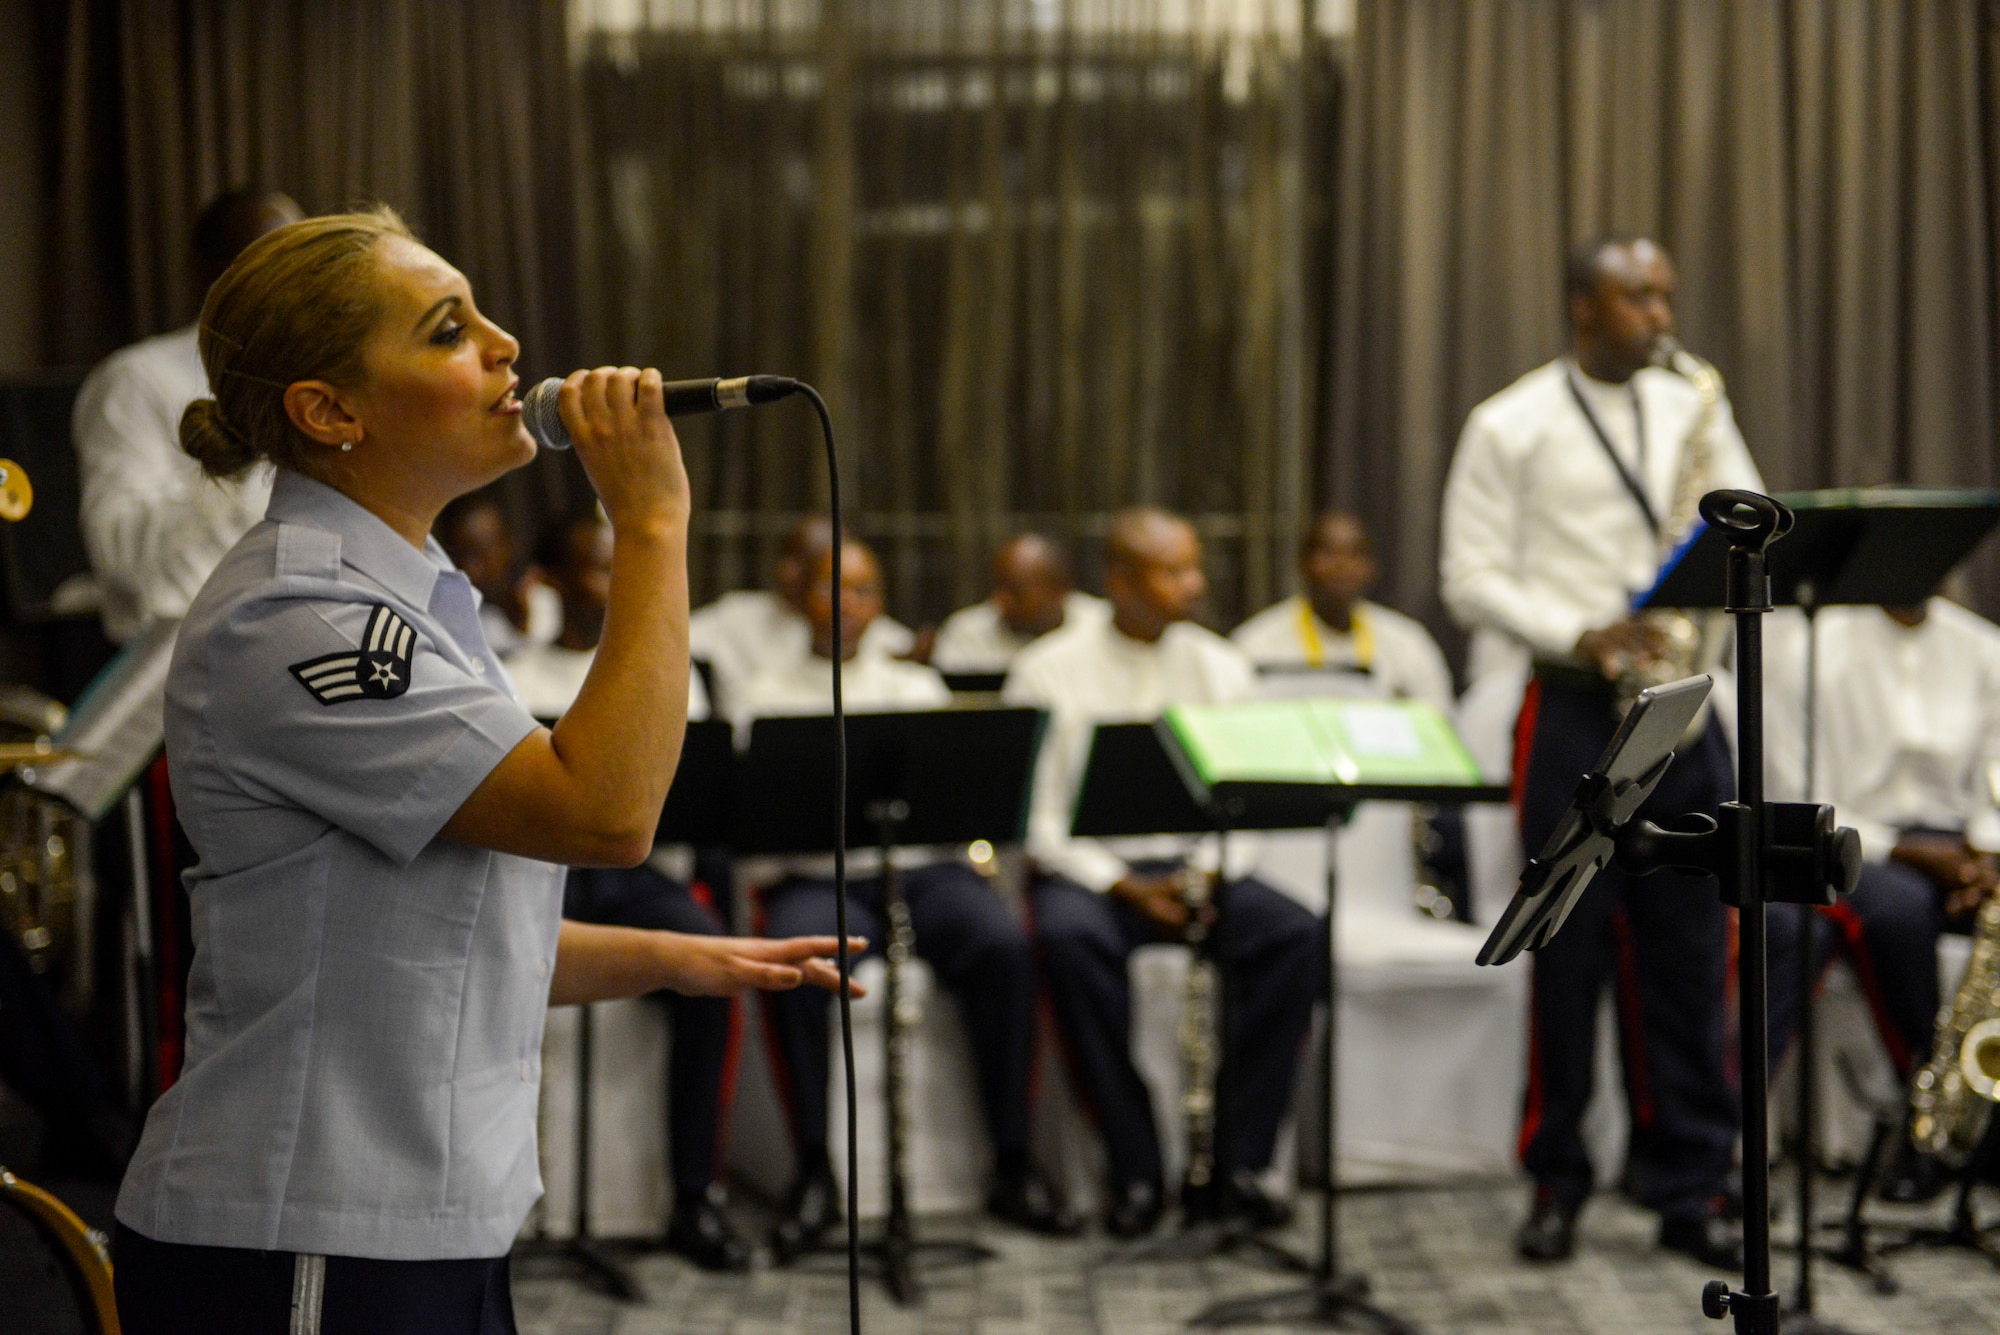 U.S. Air Force Senior Airman Linda Casul, U.S. Air Forces in Europe Band vocalist, sings a song accompanied by musicians of the Rwanda Defence Force Band during an African Partnership Flight Rwanda cultural dinner in Kigali, Rwanda, March 7, 2019. The bands used music to enhance the people-to-people relationship between the United States, Rwanda, and the other participating countries in the APF Rwanda. (U.S. Air Force photo by Tech. Sgt. Timothy Moore)